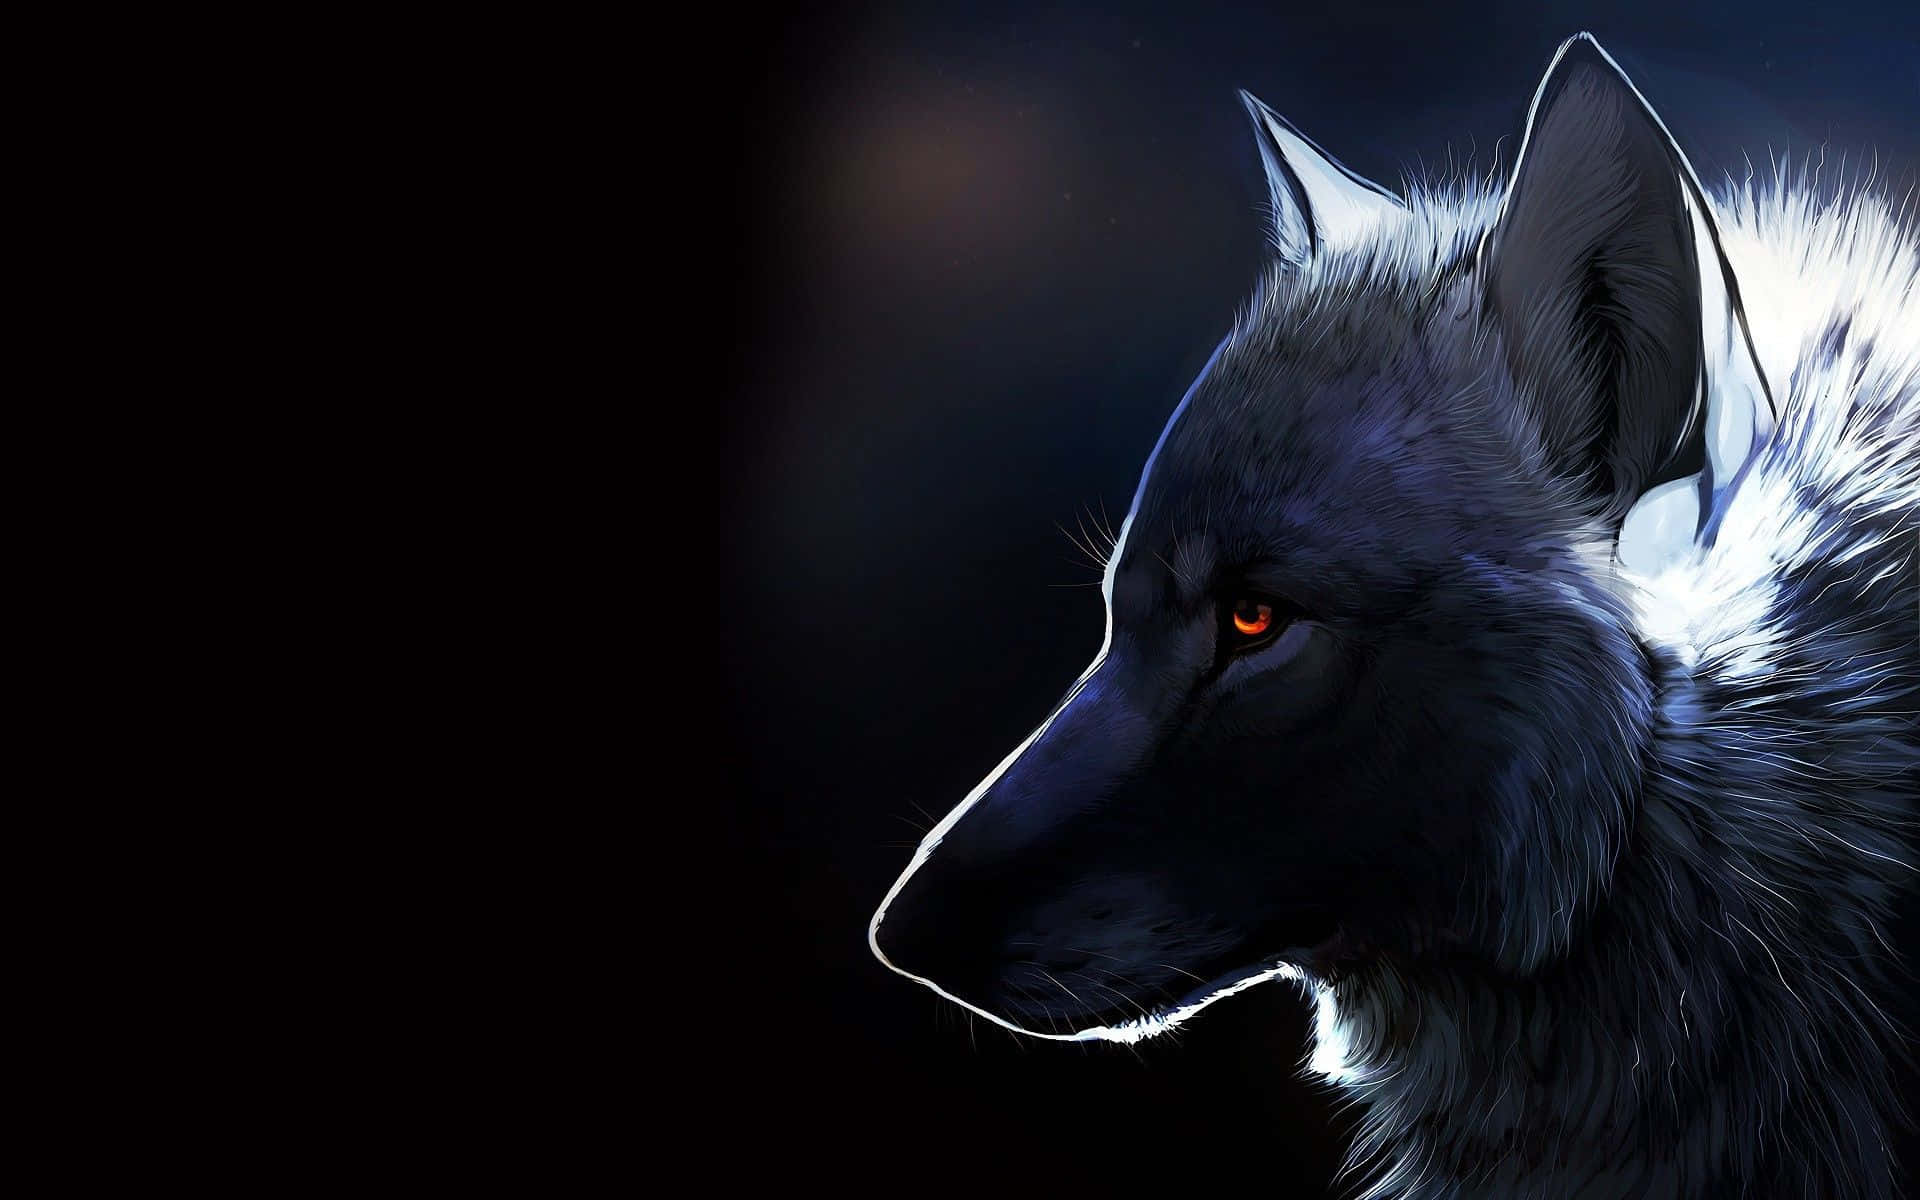 Howling Under The Starry Night Sky – Super Cool Wolf Wallpaper